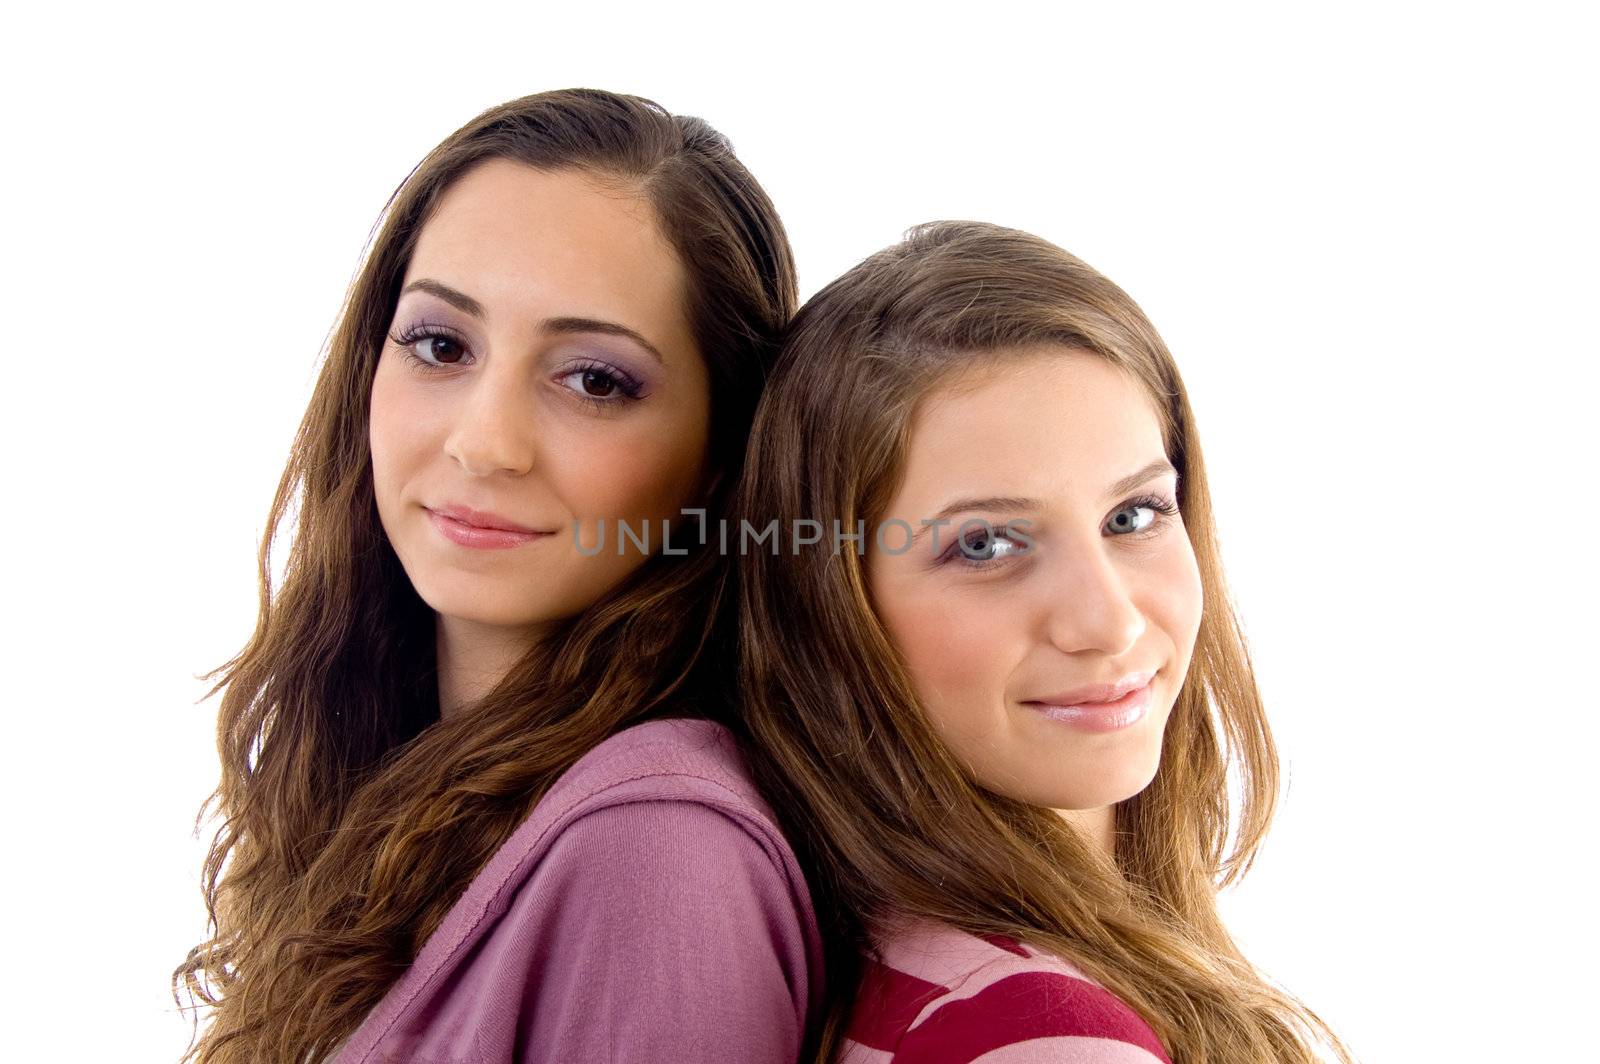 close up view of teens friends smiling and looking at camera against white background